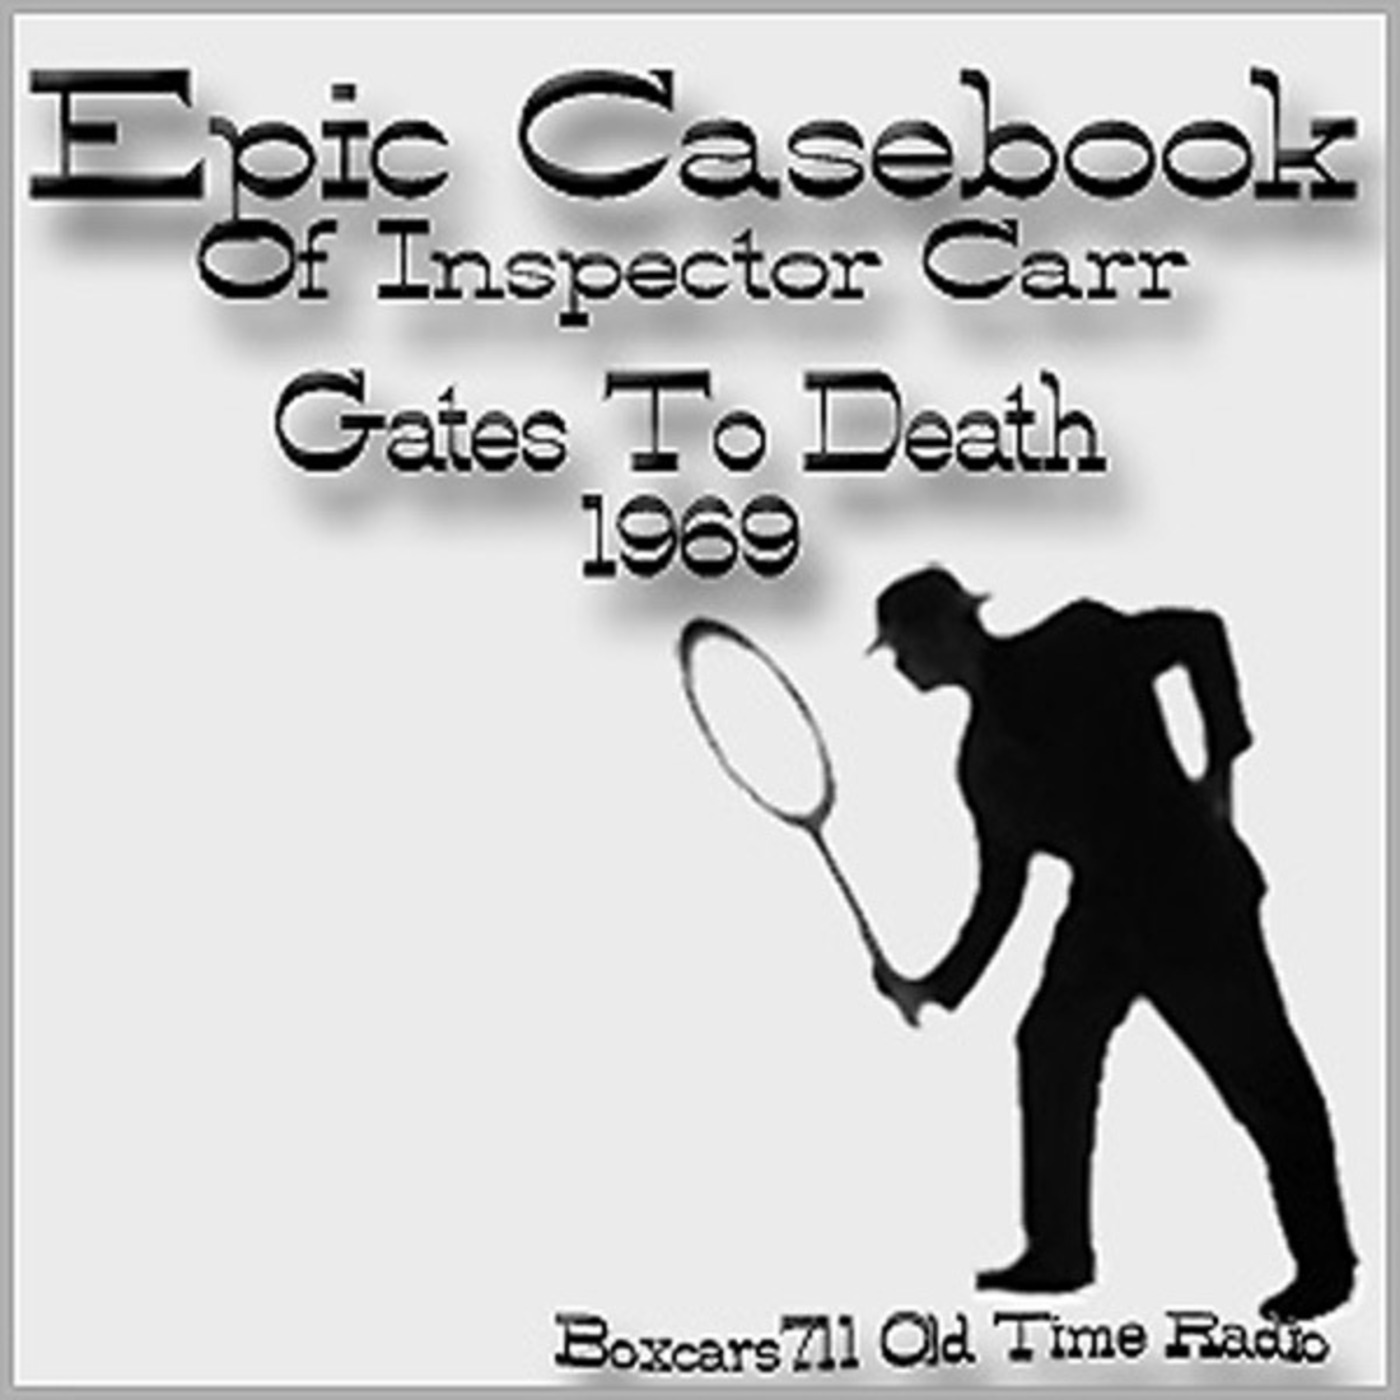 Episode 9670: The Epic Casebook Of Inspector Carr - 